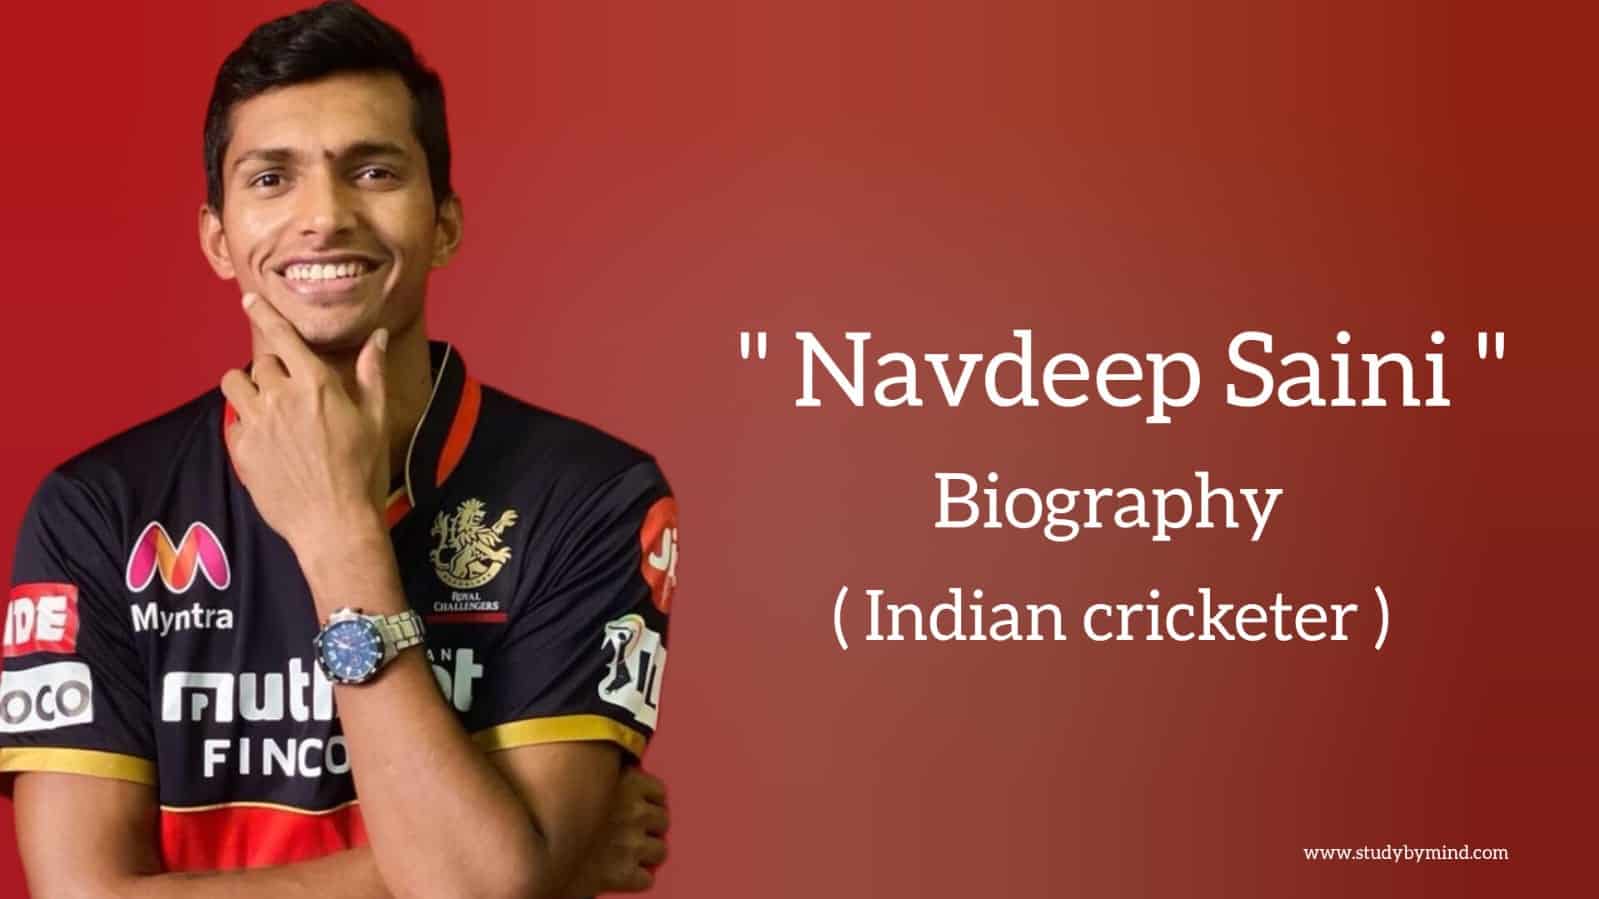 You are currently viewing Navdeep saini biography in english (Indian cricketer)